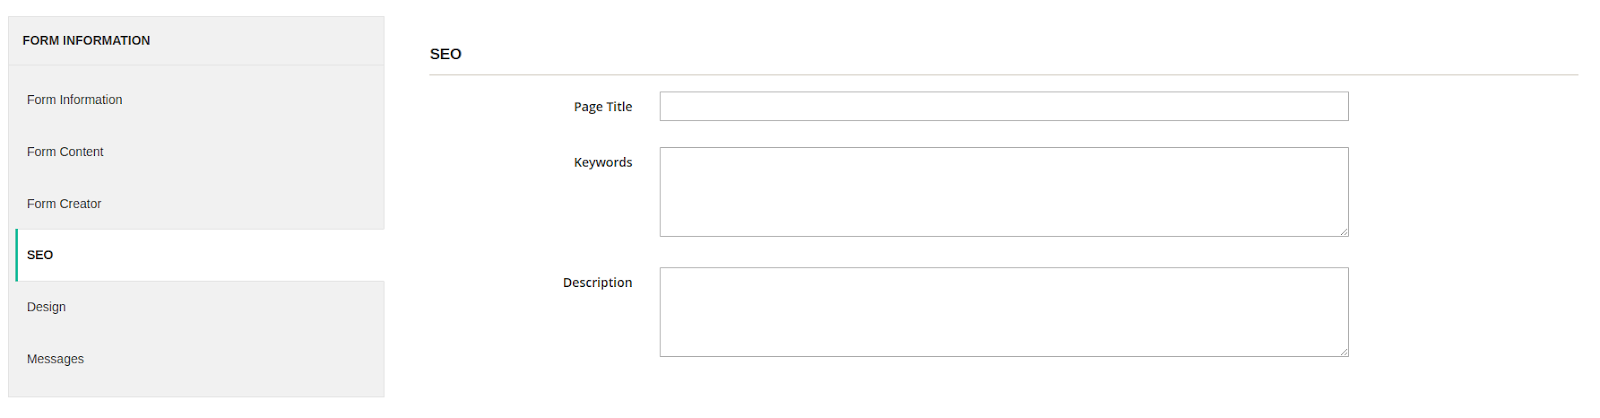 Create The Form In Magento 2 Front End With Module